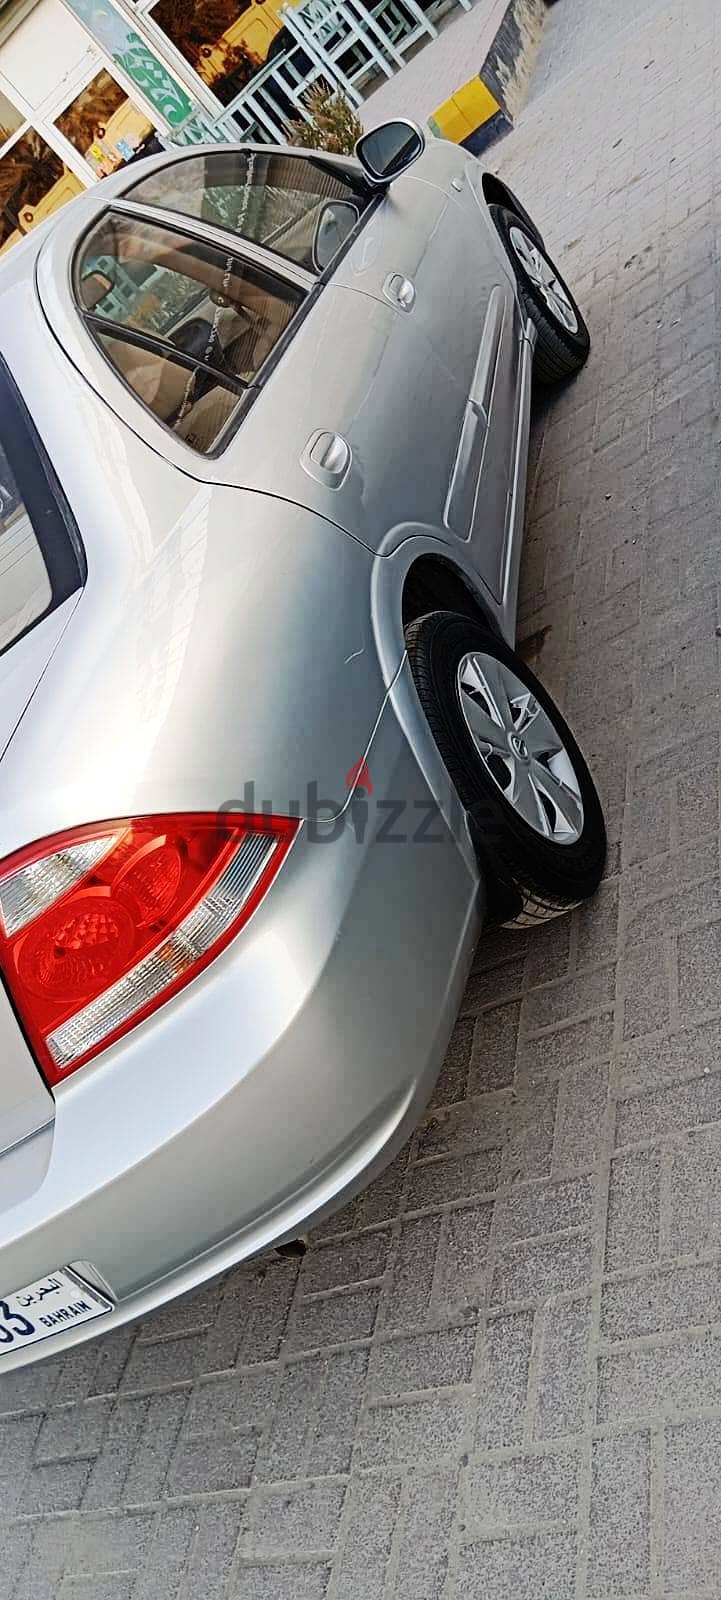 Nissan Sunny_Model 2010_Execellent Conditions_32121840, whapp:37701829 3